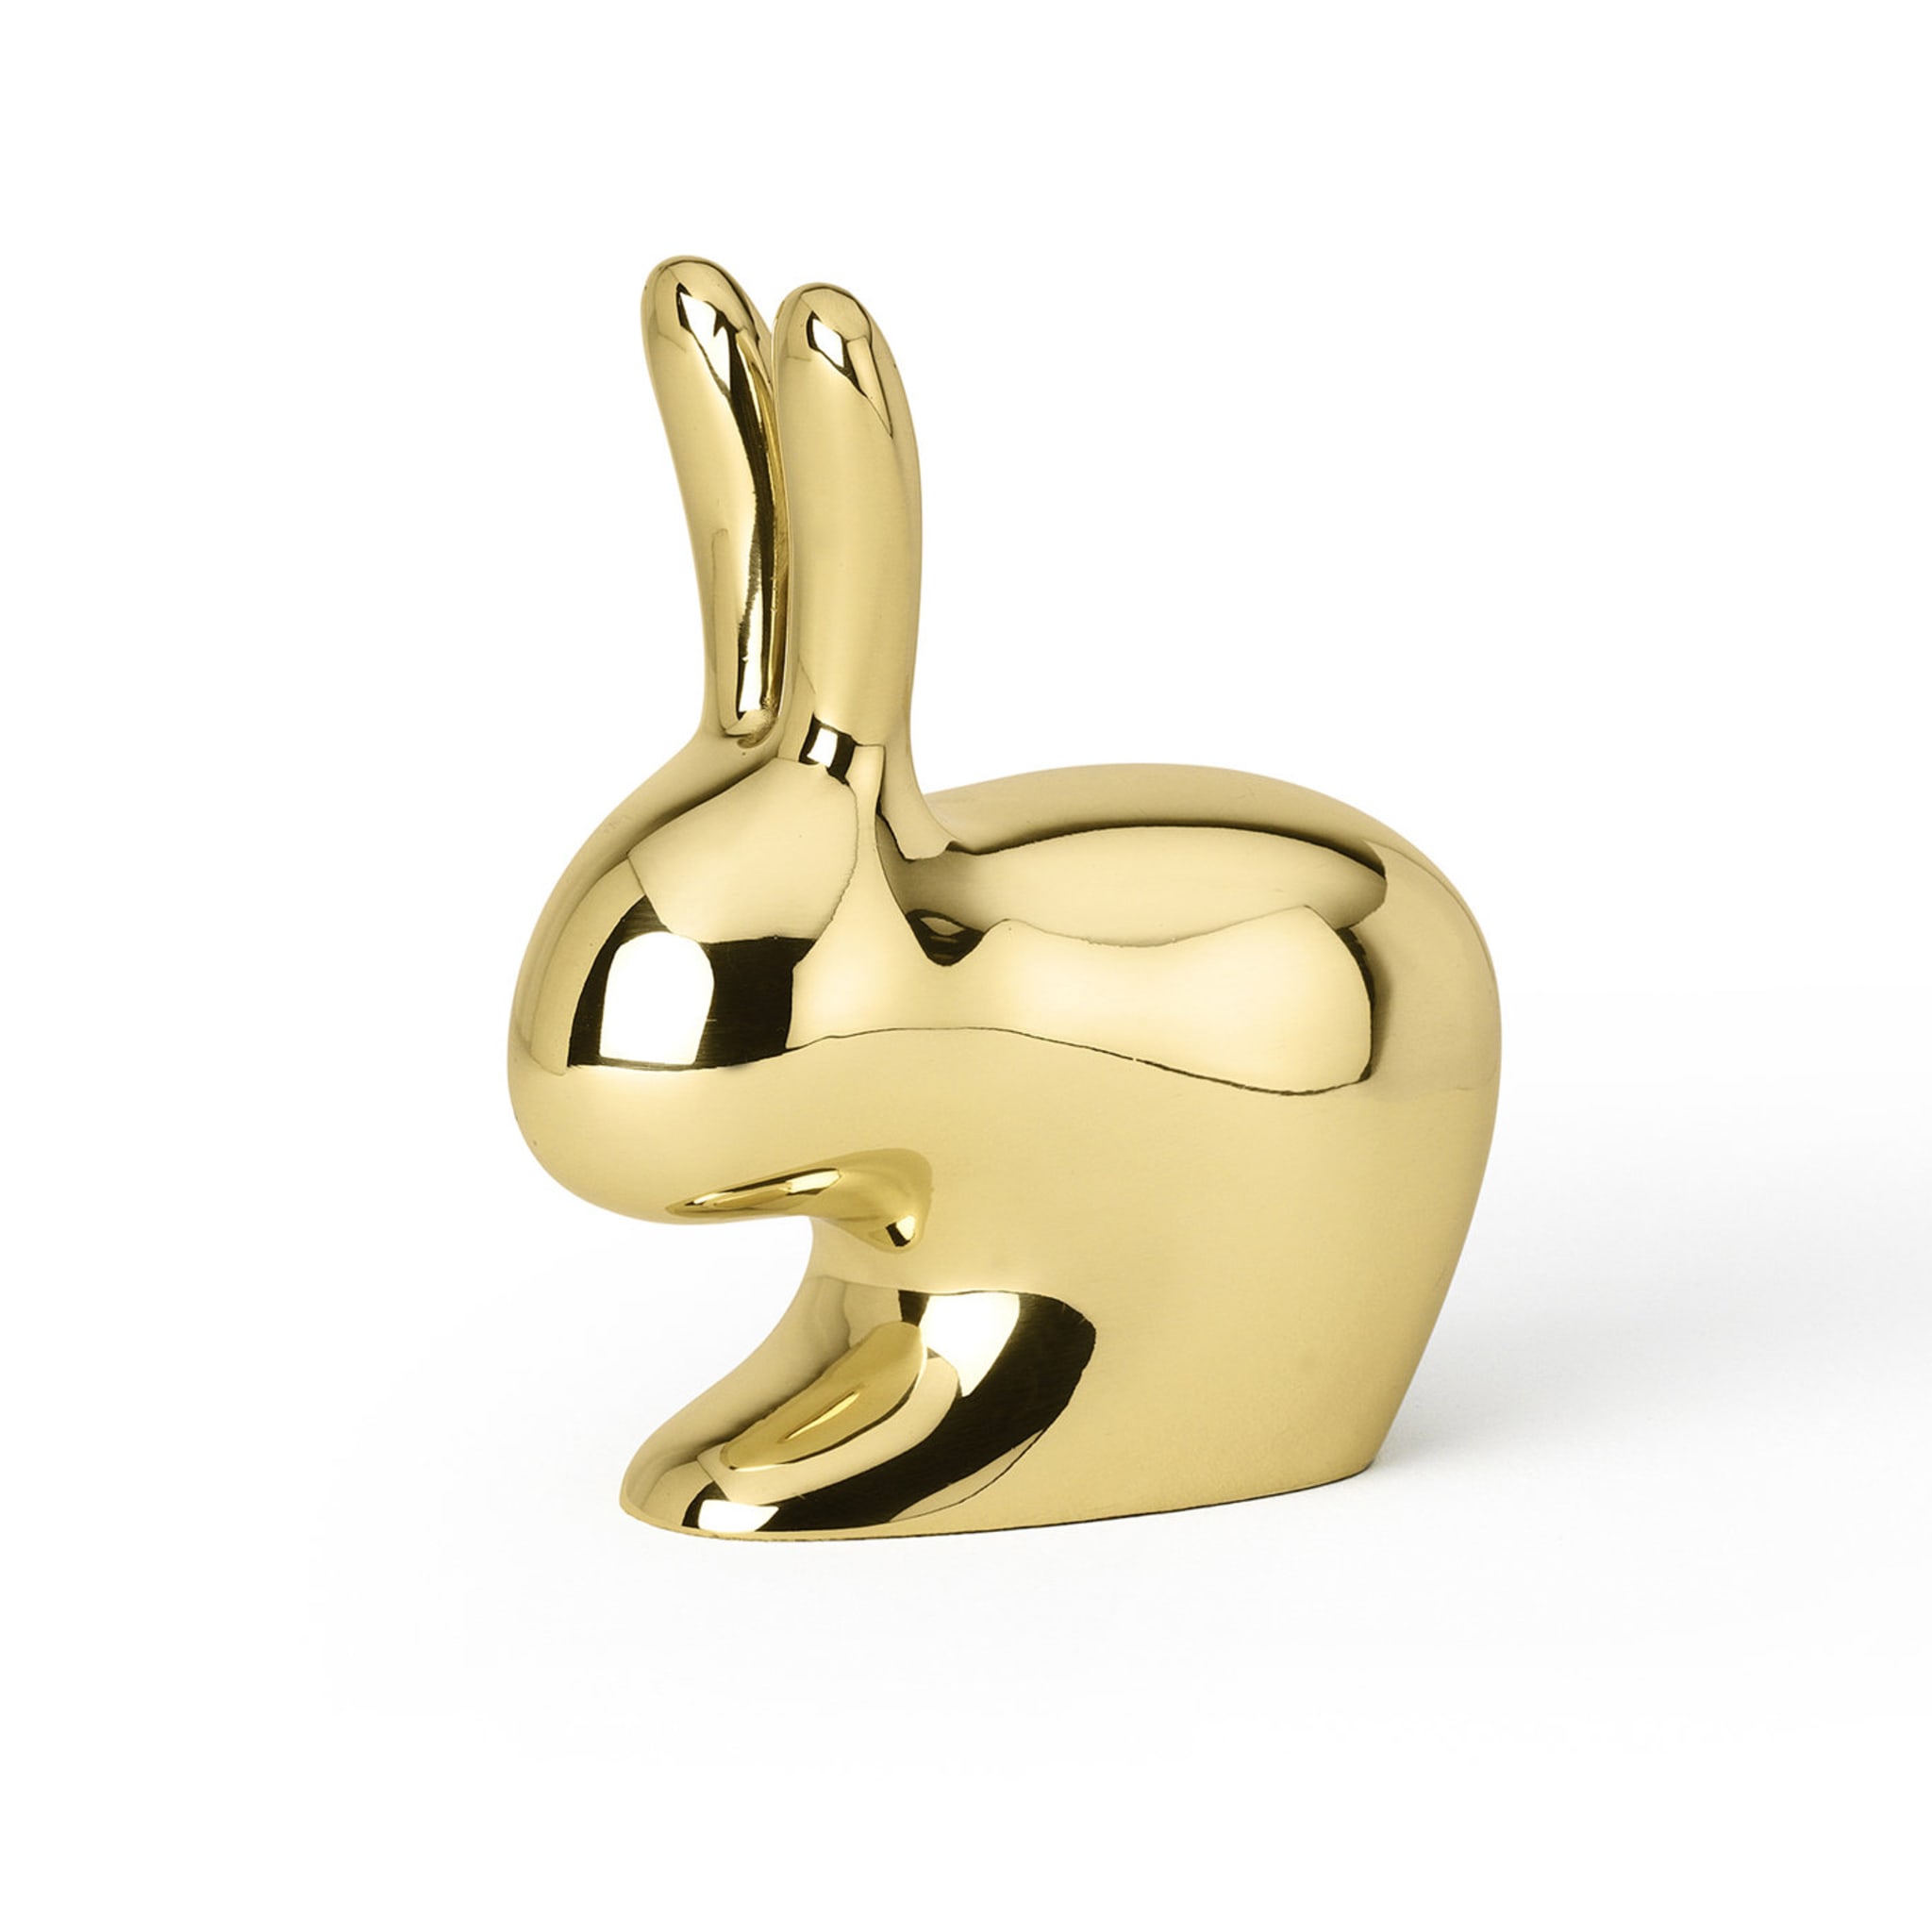 Rabbit Doorstop in Polished Brass by Stefano Giovannoni - Alternative view 1